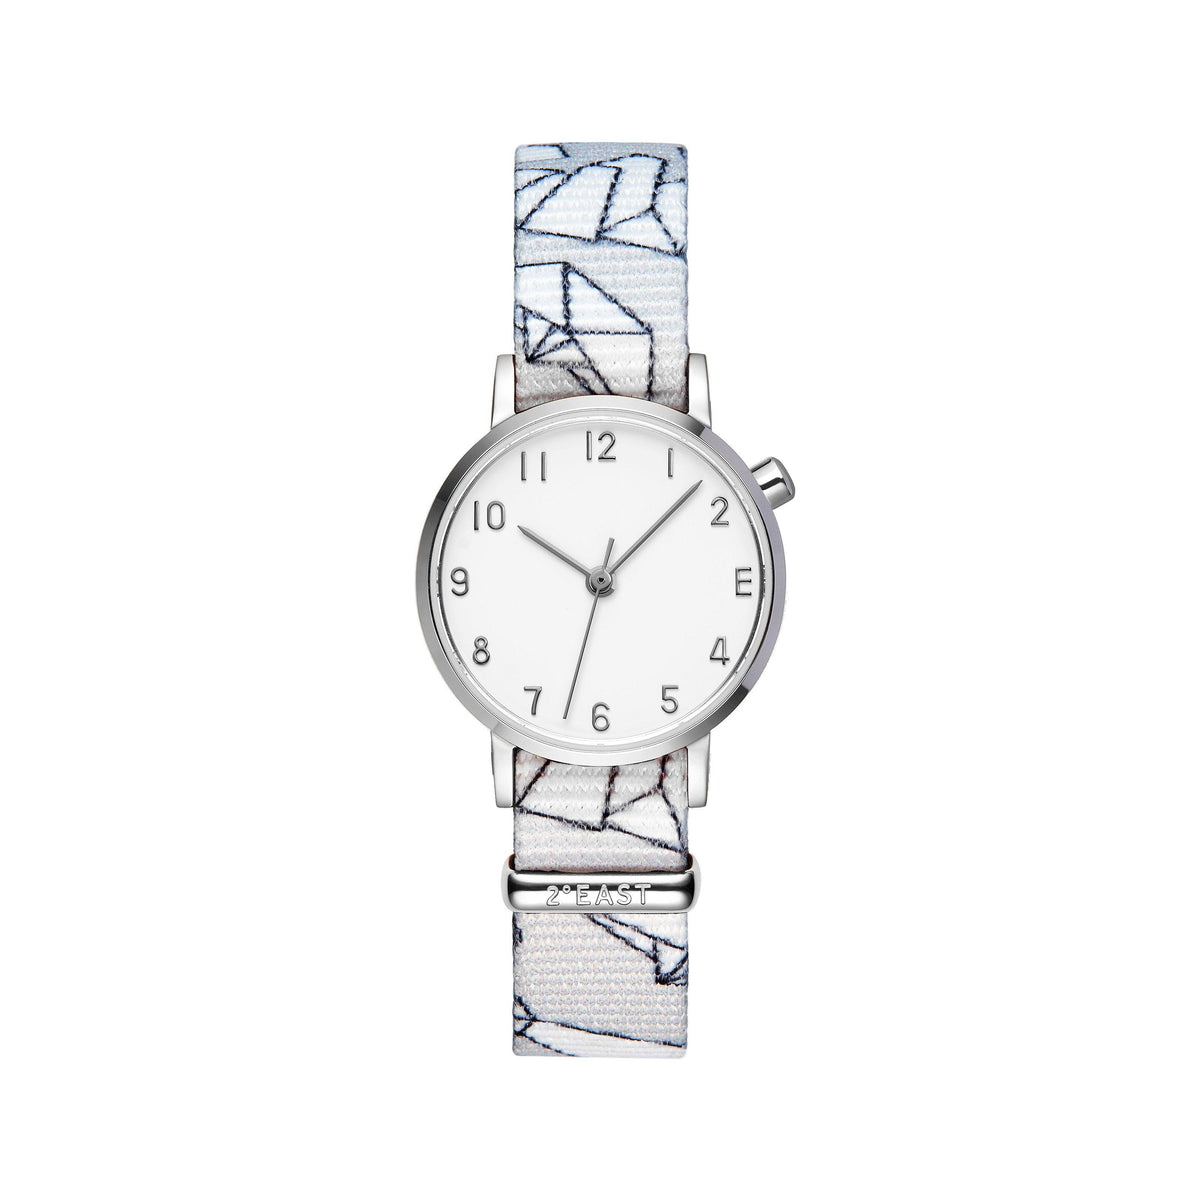 The White and Silver Watch - Origami (Kids)